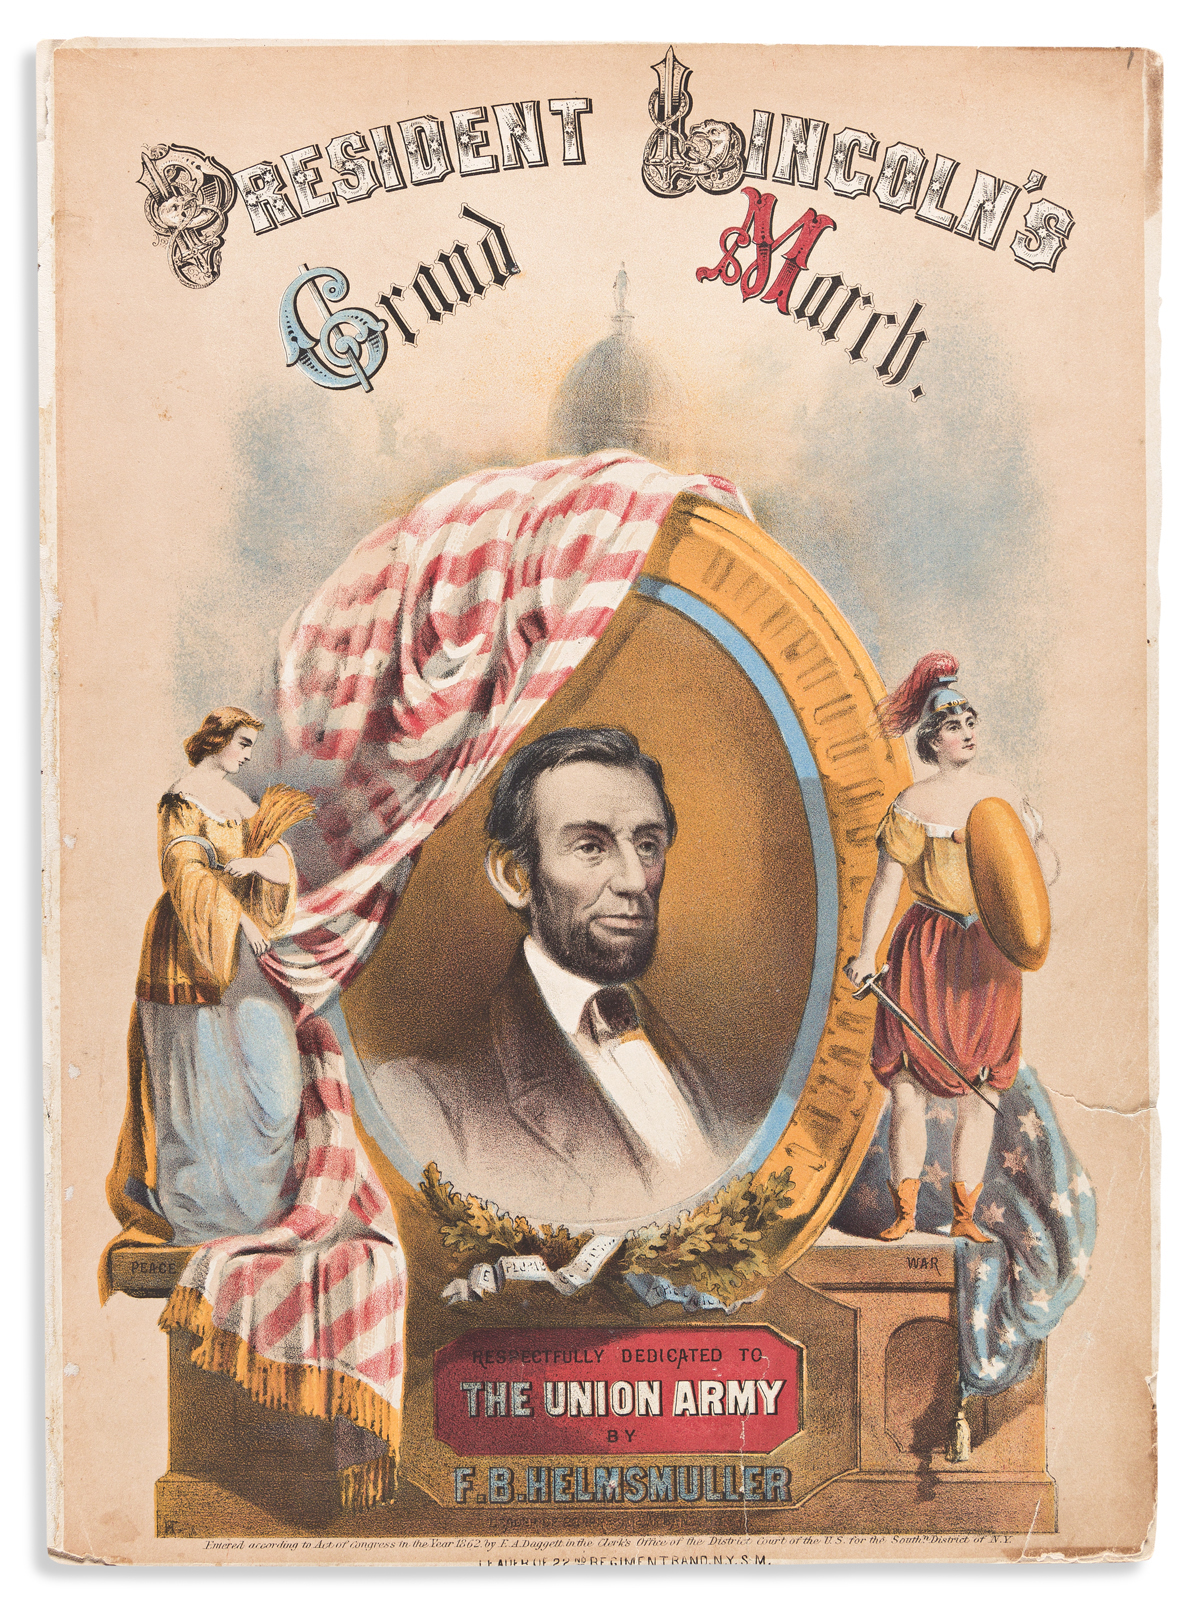 (ABRAHAM LINCOLN.) F.B. Helmsmüller. President Lincolns Grand March, Respectfully Dedicated to the Union Army.